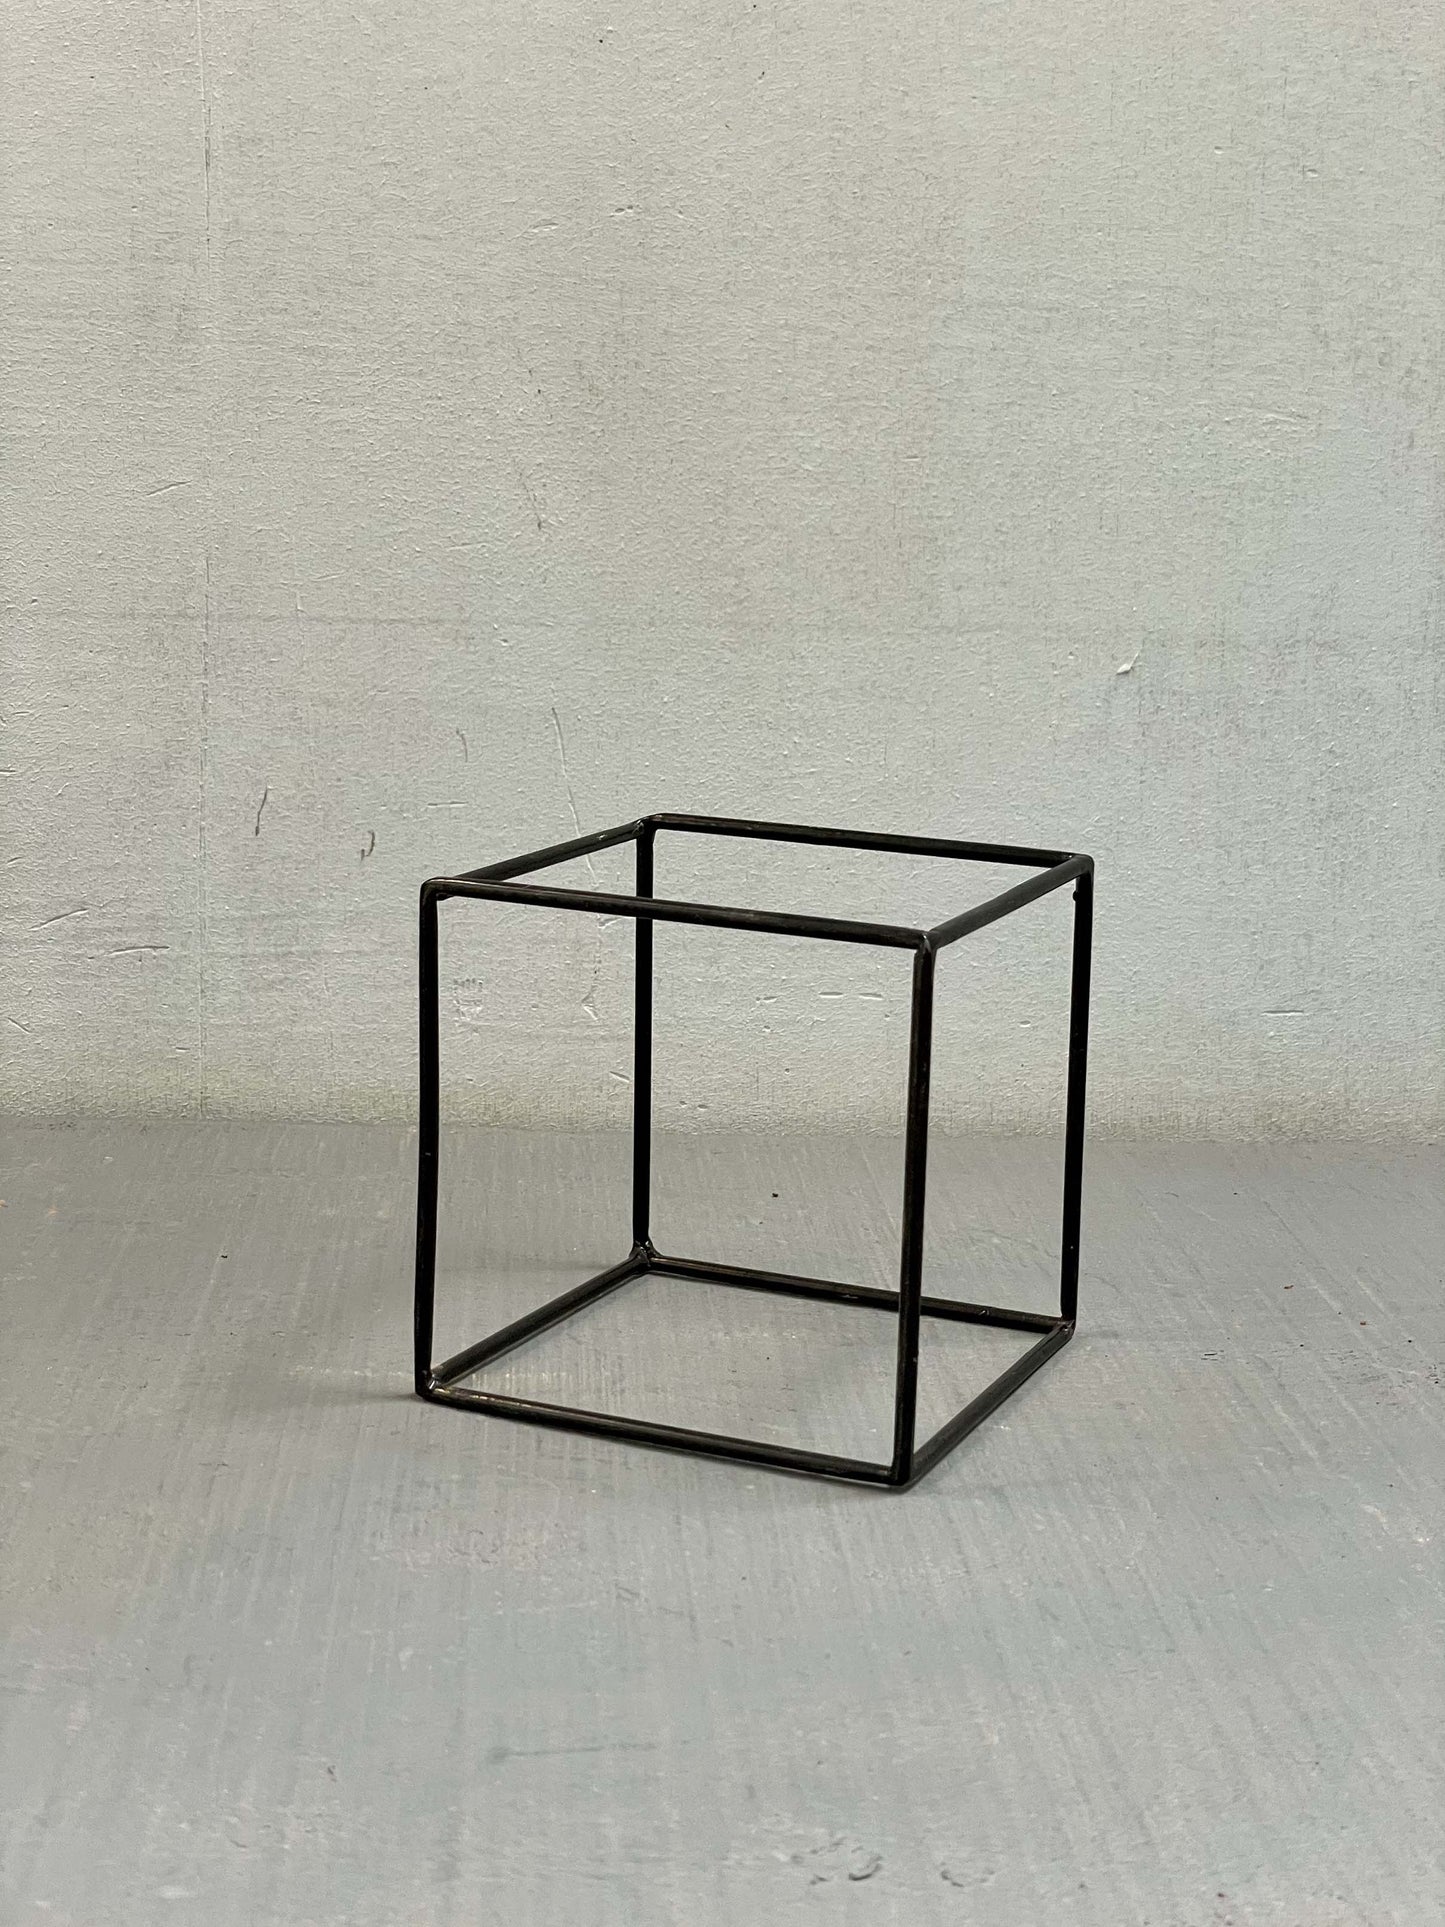 Metal Square Stand - S/L